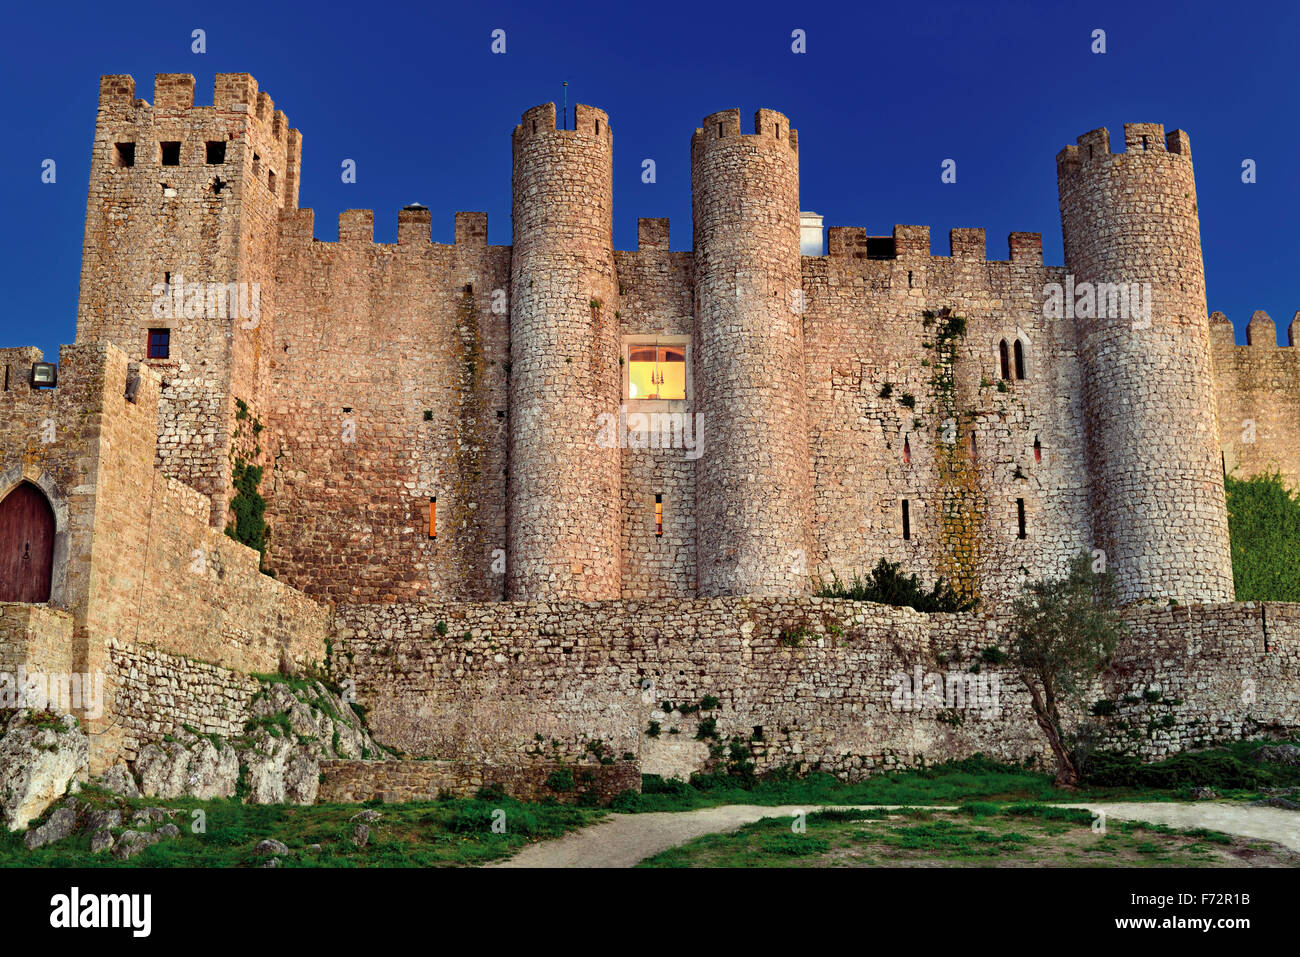 Portugal: Medieval castle and Pousada of the historic village Óbidos Stock Photo